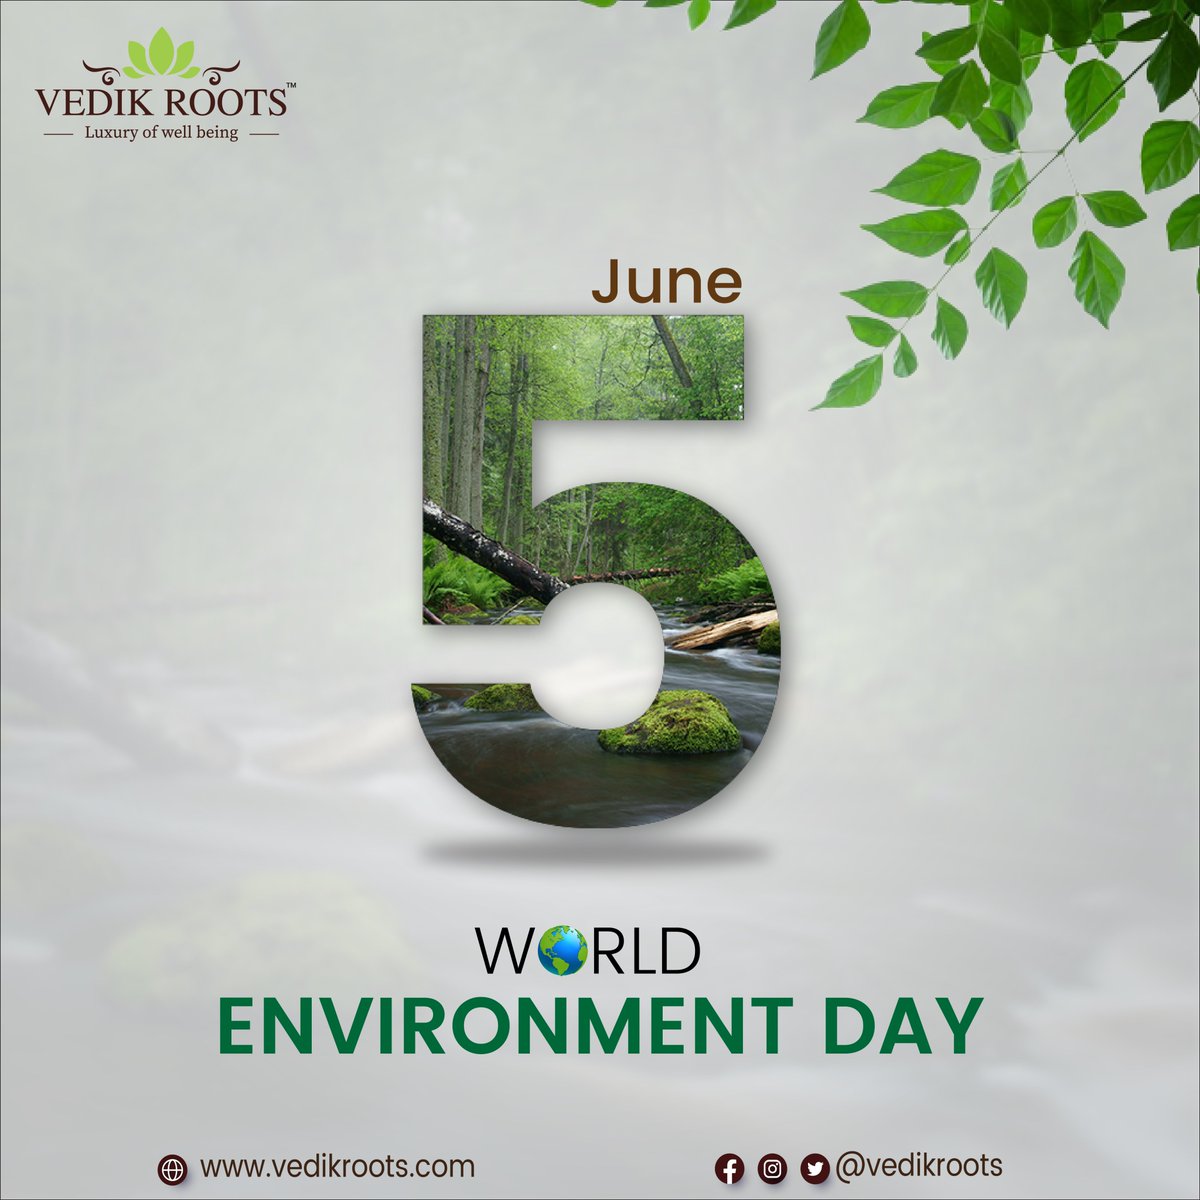 Let's make every day World Environment Day by making conscious choices that nurture and protect our planet. 🌿💙 Happy World Environment Day! #Vedikroots #ConsciousLiving #EarthProtectors